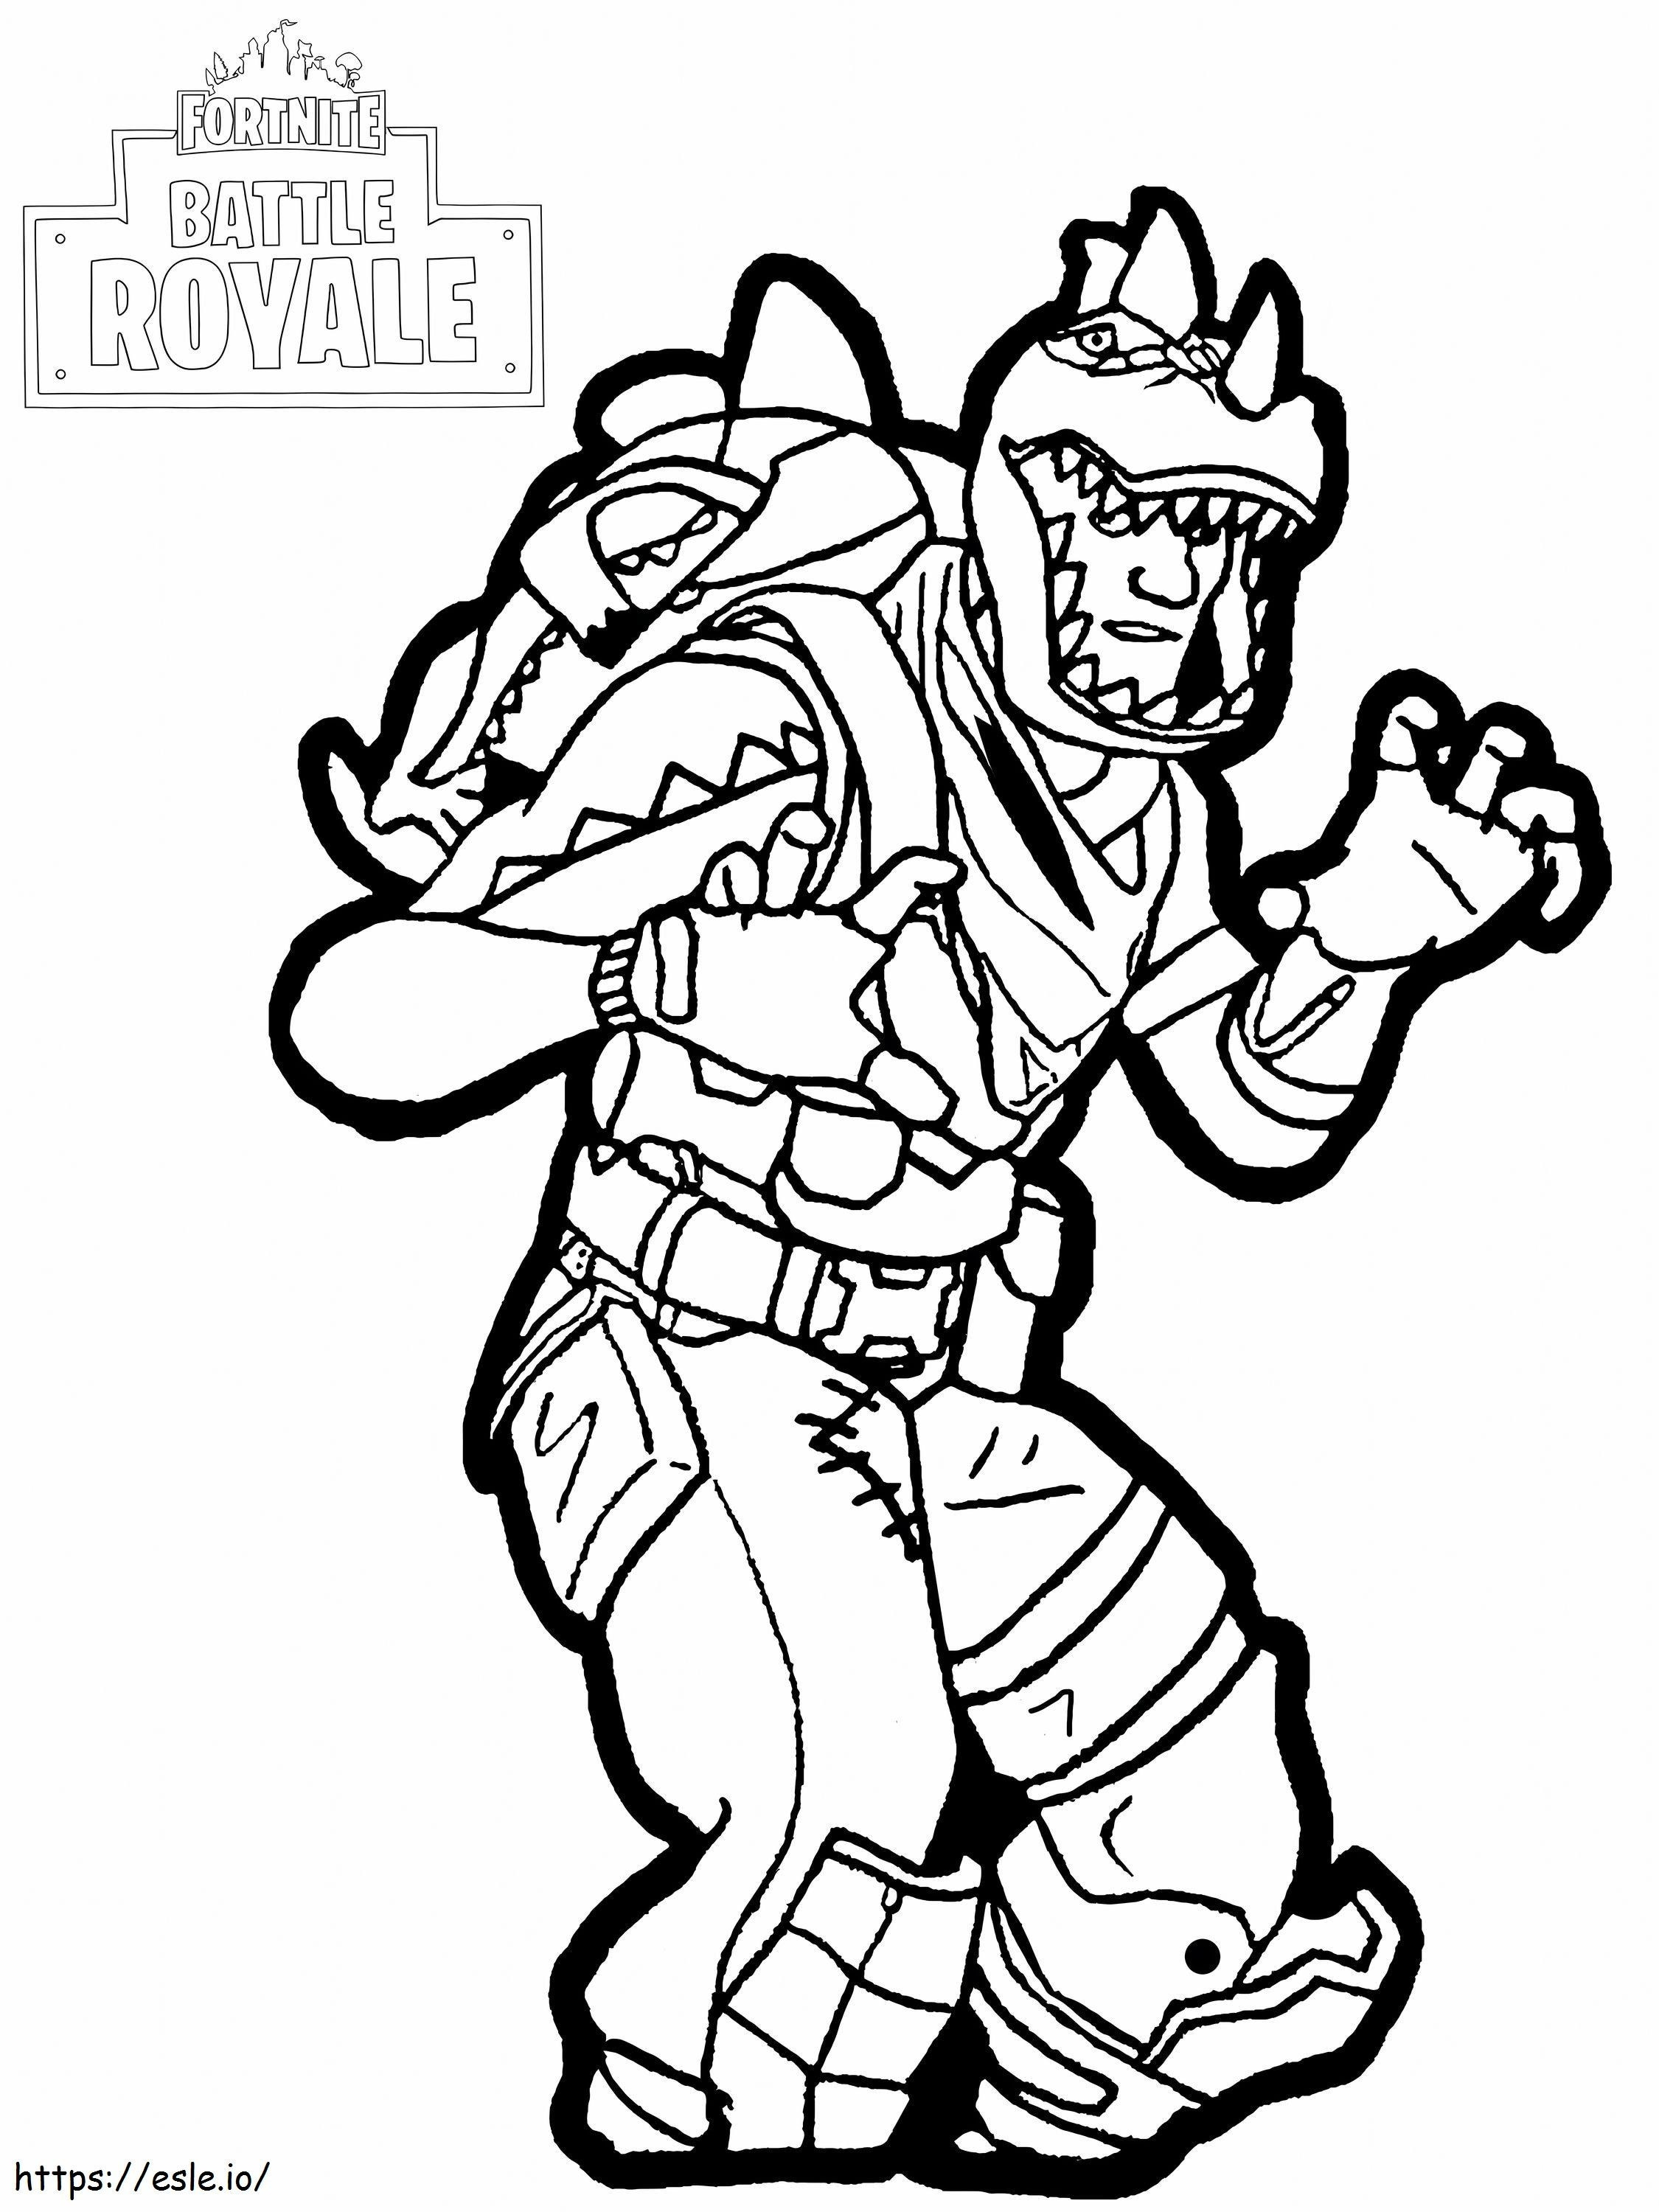 1540288714 For Children Fortnite Battle Royale 86112 Scaled 2 coloring page